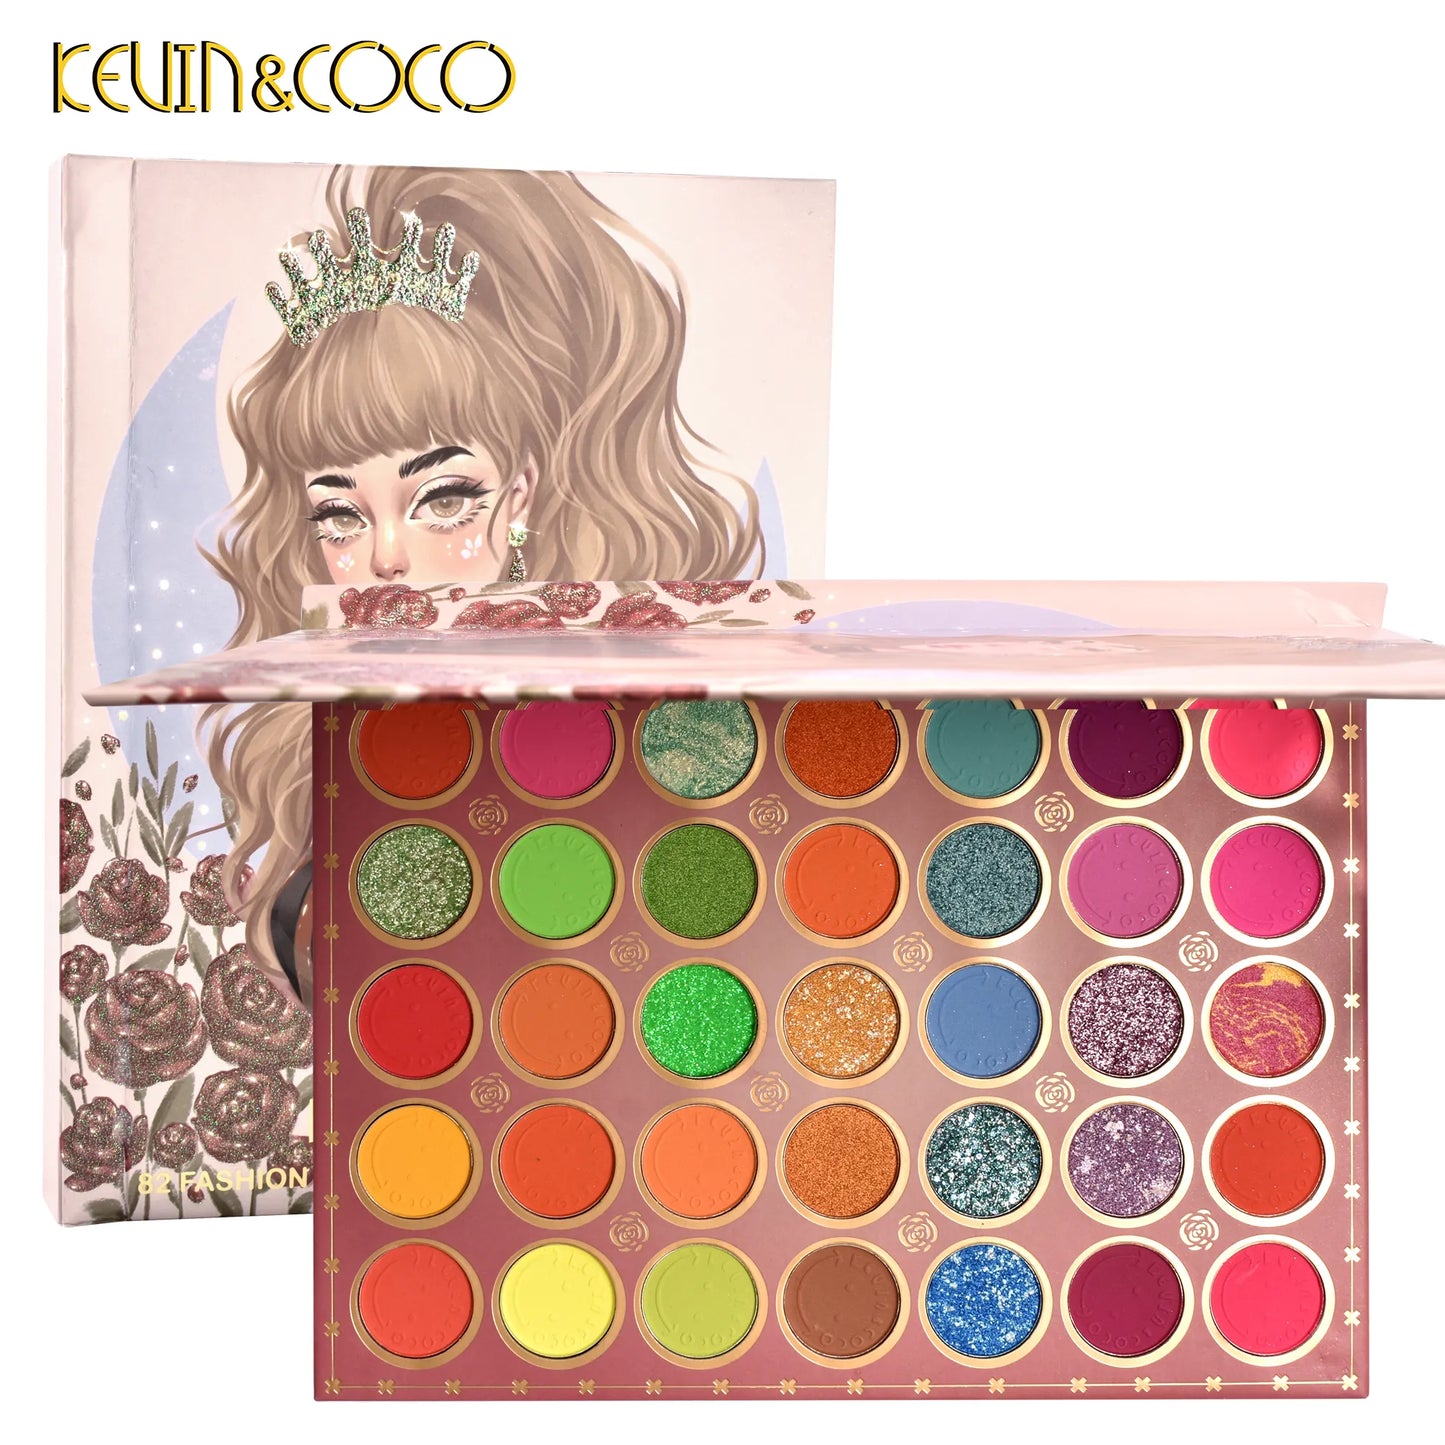 KEVIN&COCO 82 COLORS FACE PALETTE RED ROSES KC221386 R25